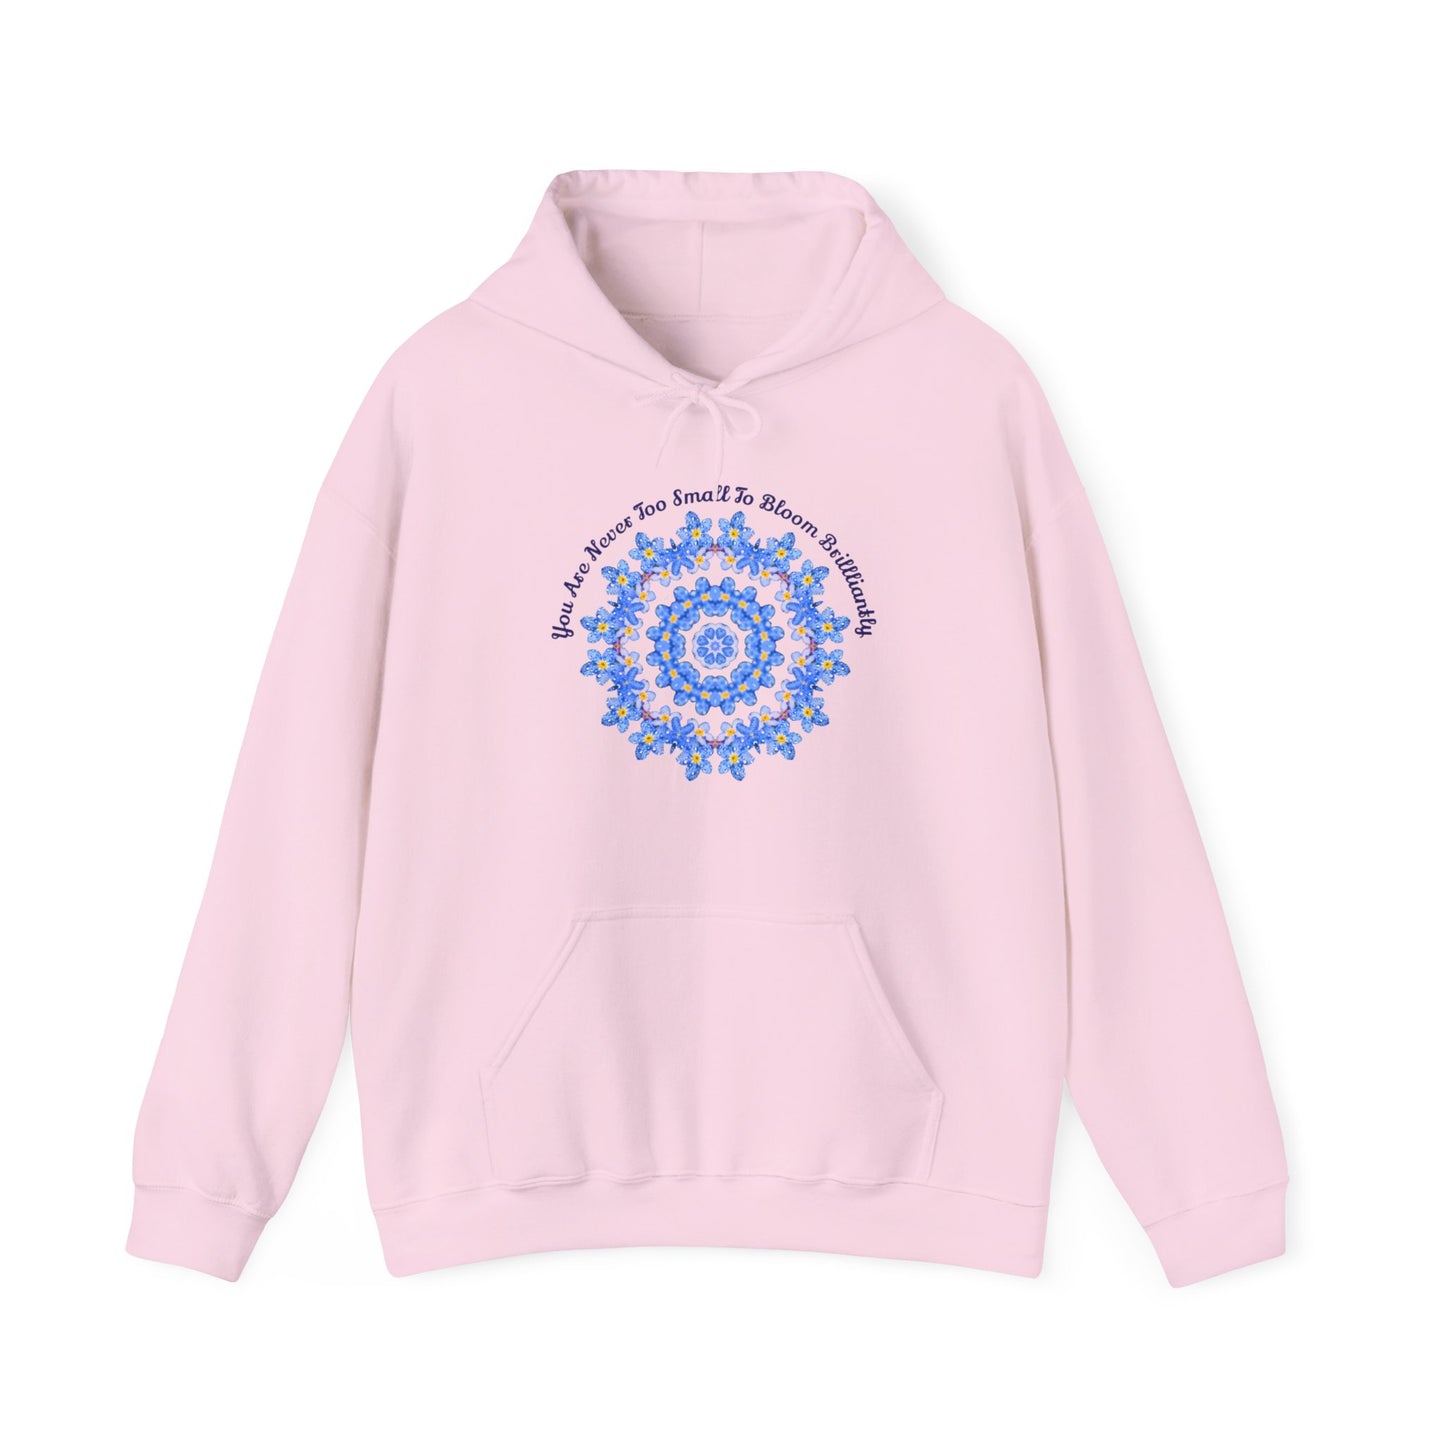 Forget Me Not Cottage Core Nature Hoodie with Pocket - Small to Plus Size Whimsical Cozy And Cute